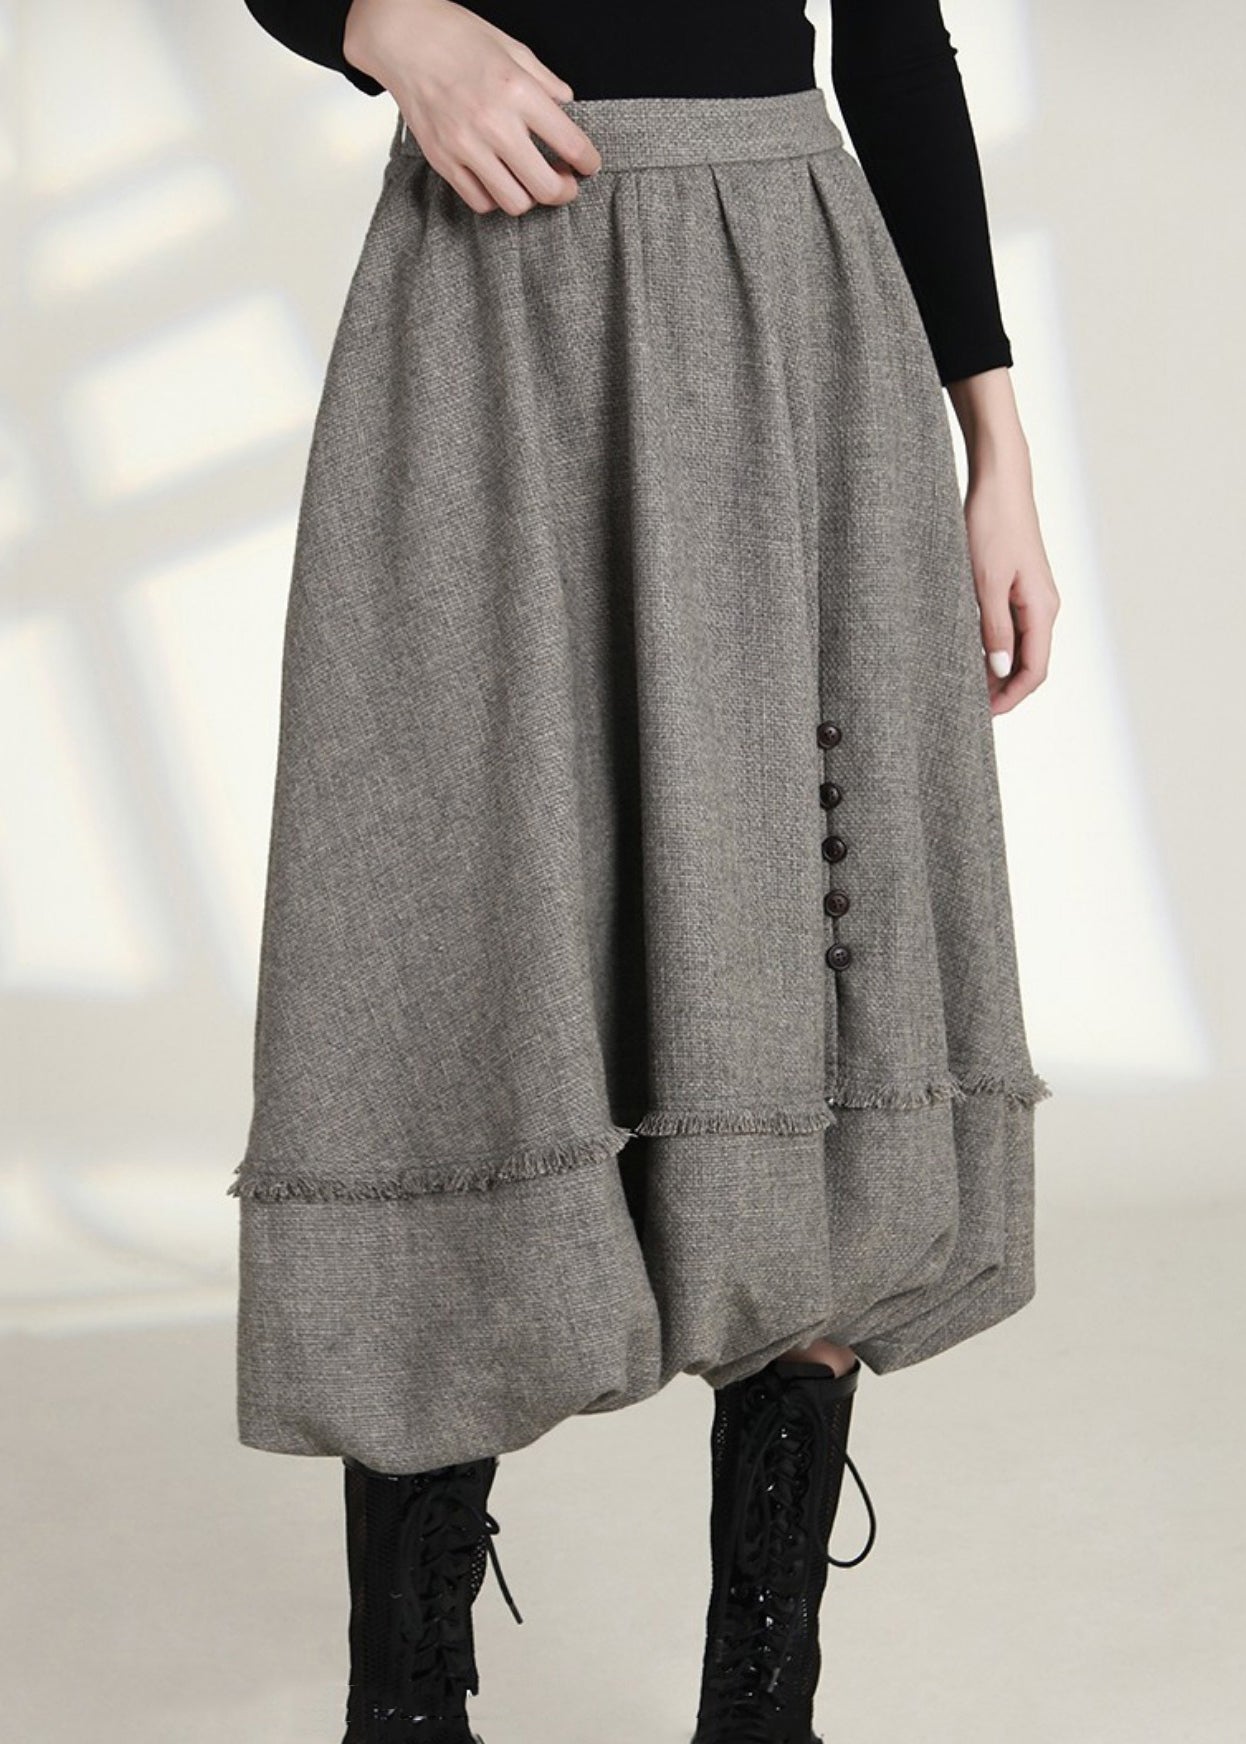 French Grey Zippered Pockets High Waist Cotton Skirts Spring AS1006 Ada Fashion